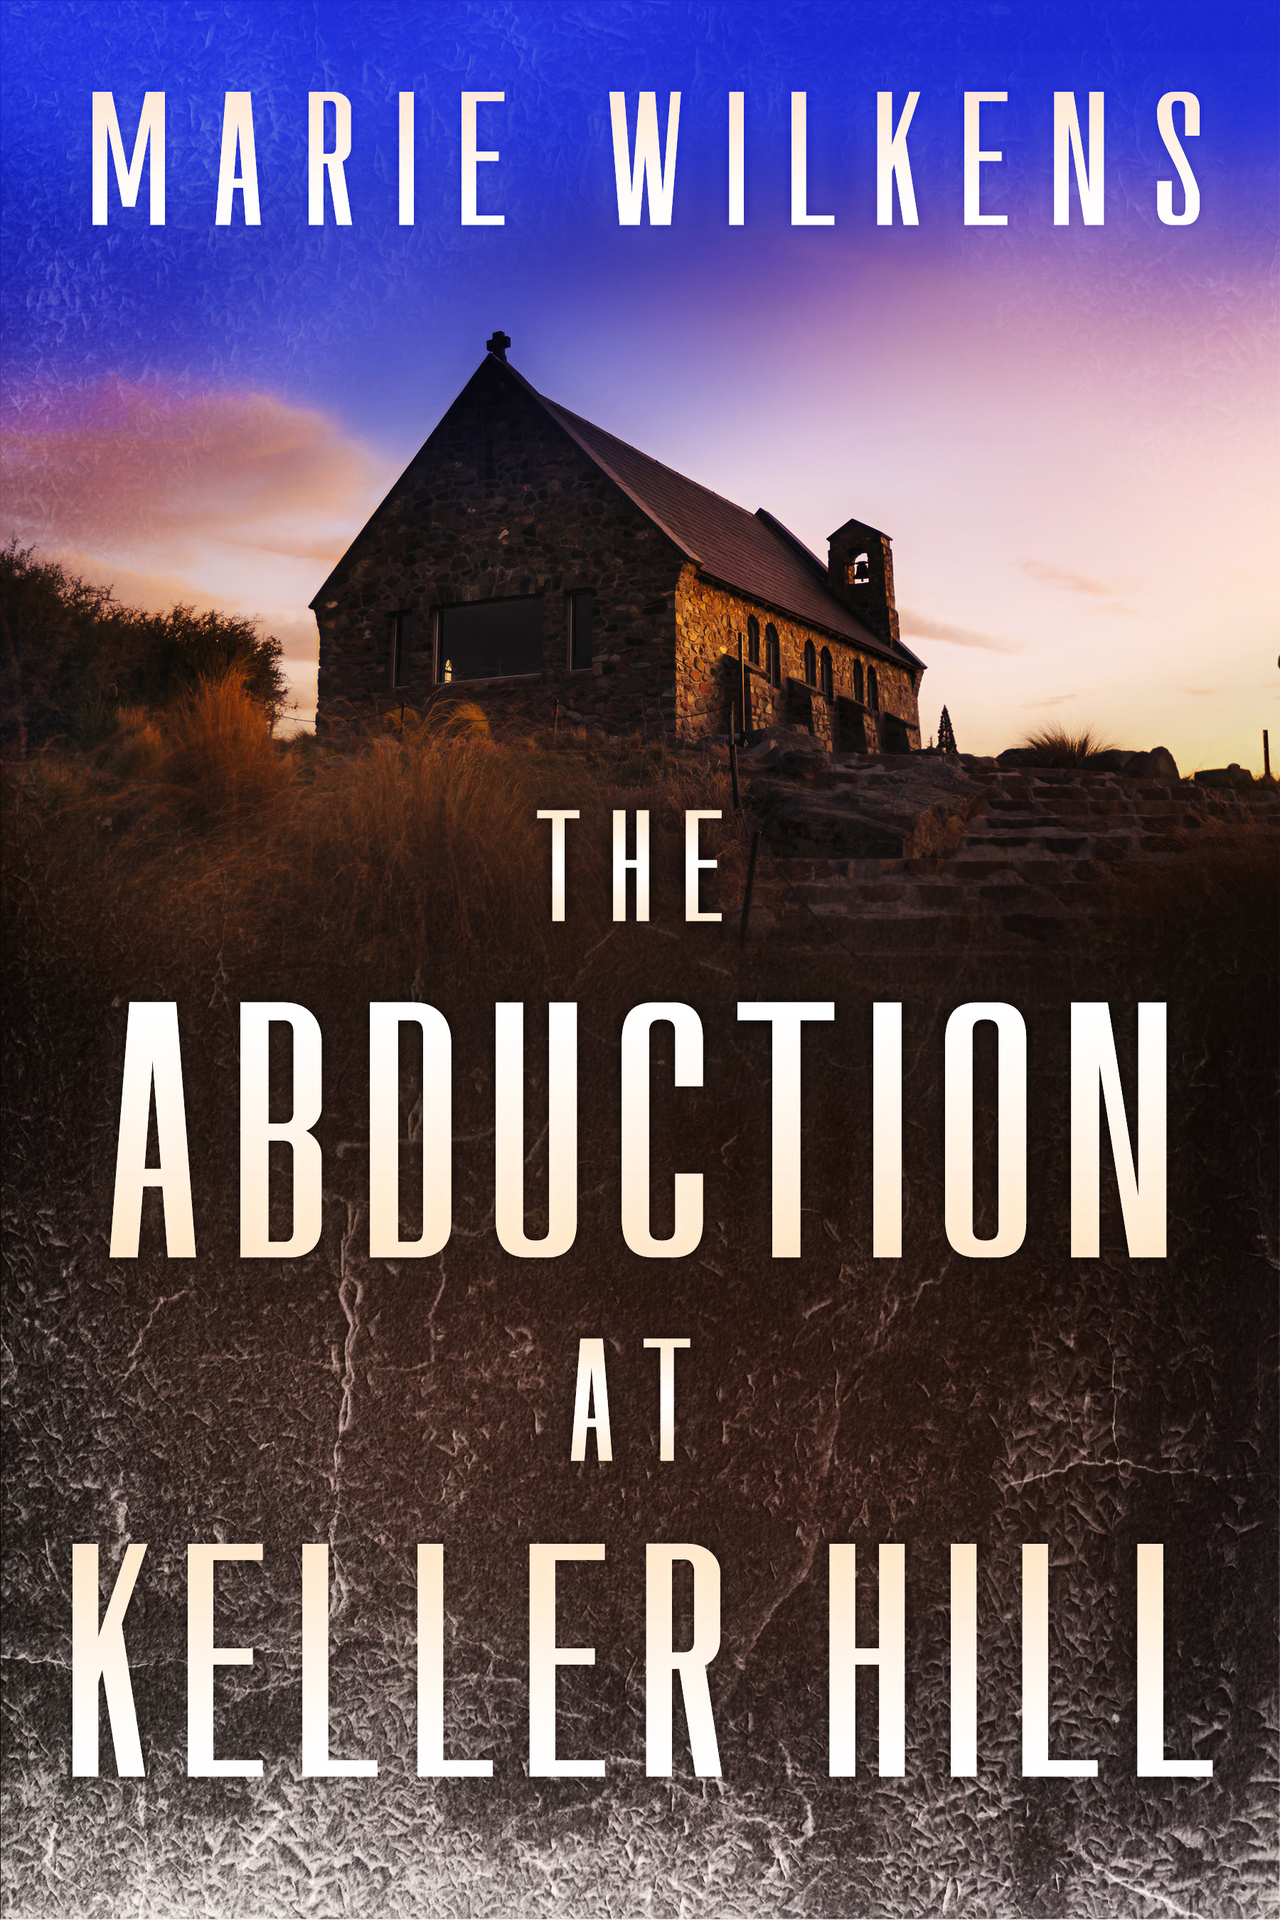 The Abduction at Keller Hill